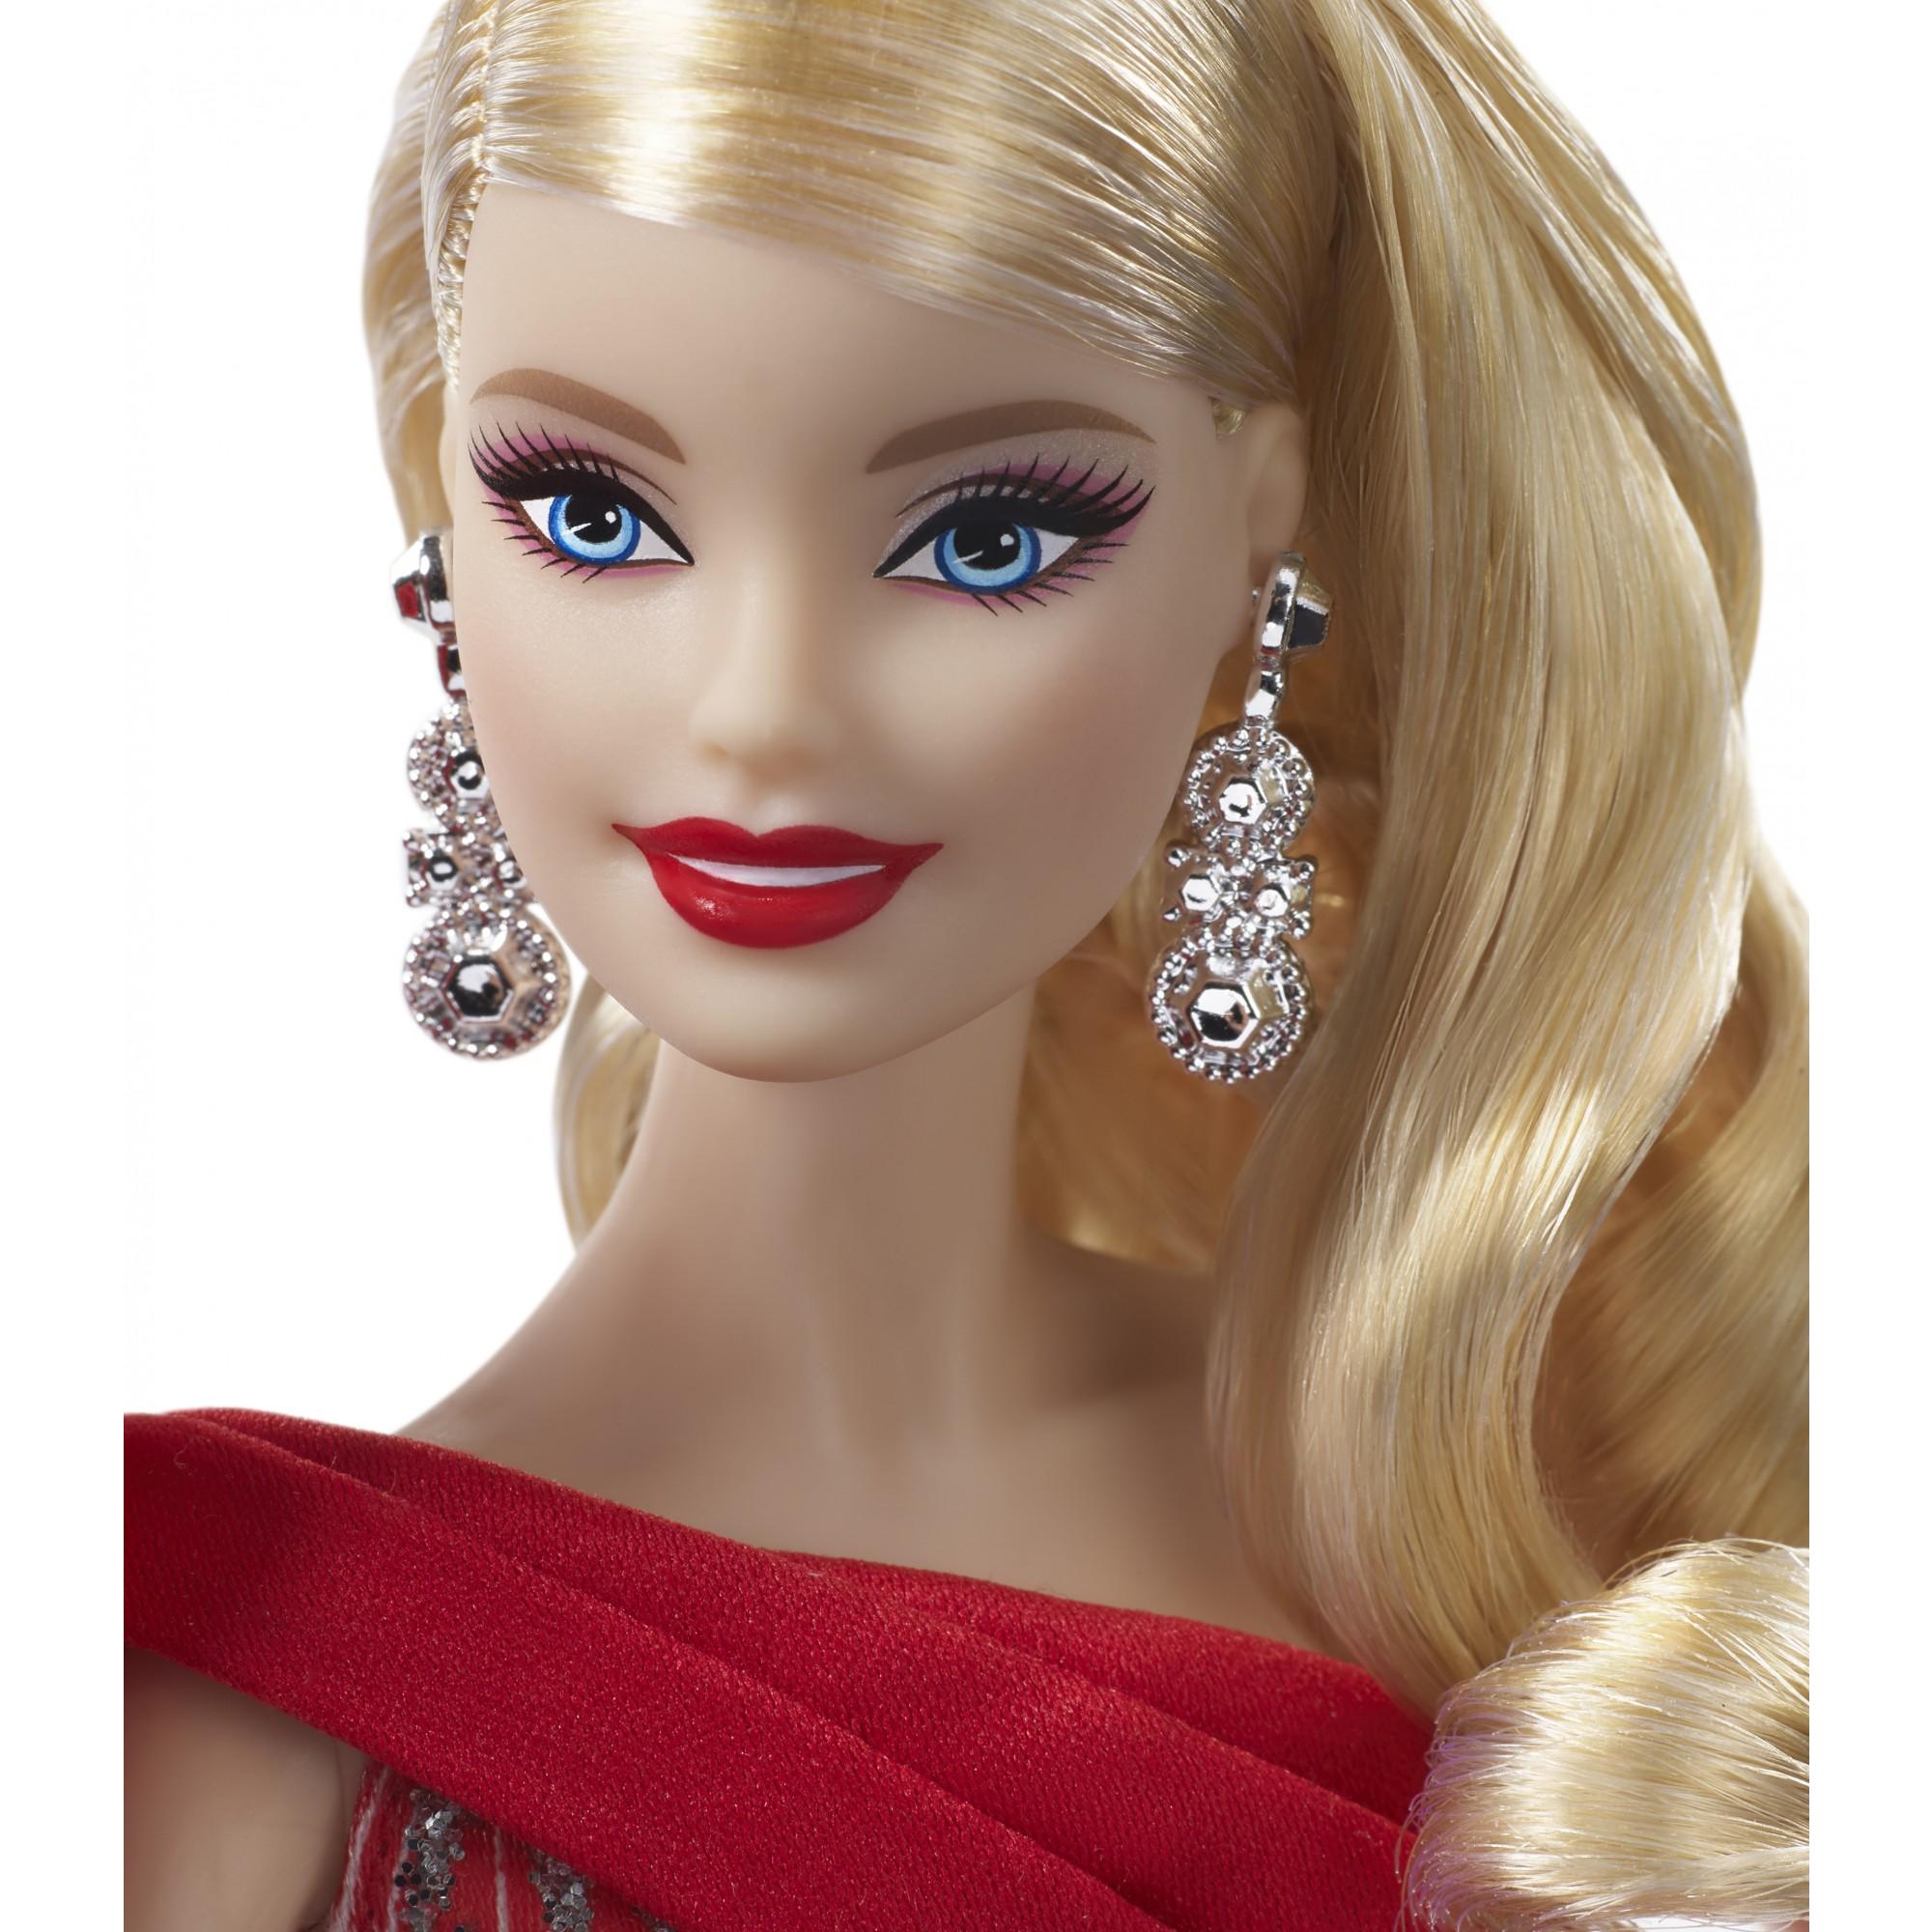 Barbie 2019 Holiday Doll, Blonde Curls with Red & White Gown - image 5 of 10